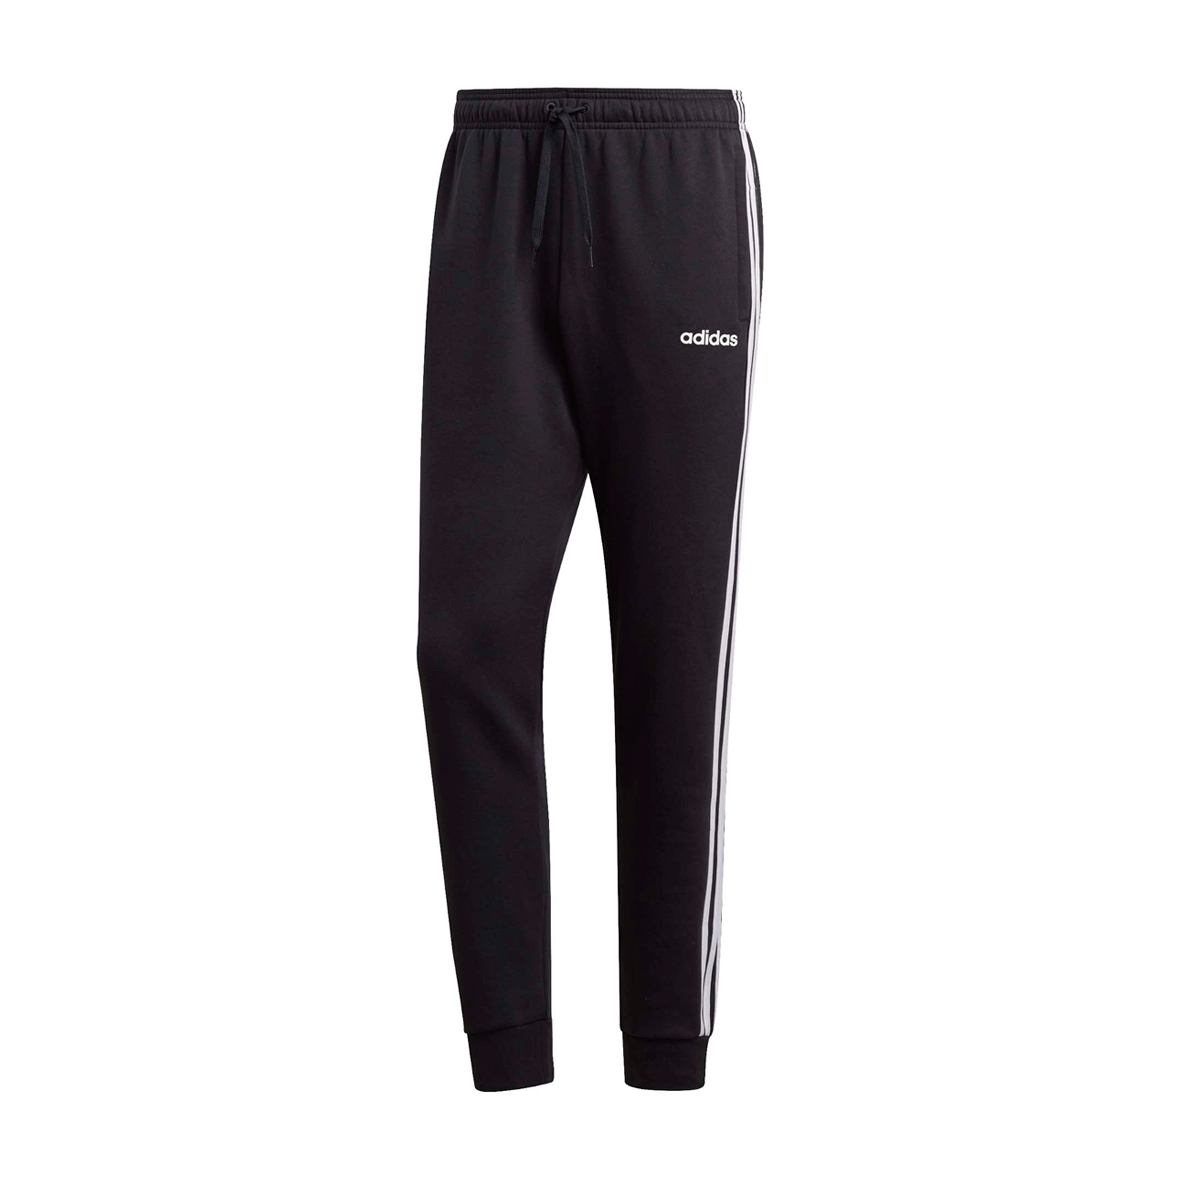 Amazon.com: adidas Men's Essentials French Terry Tapered Cuff 3-Stripes  Pants, Black/White, Medium : Sports & Outdoors